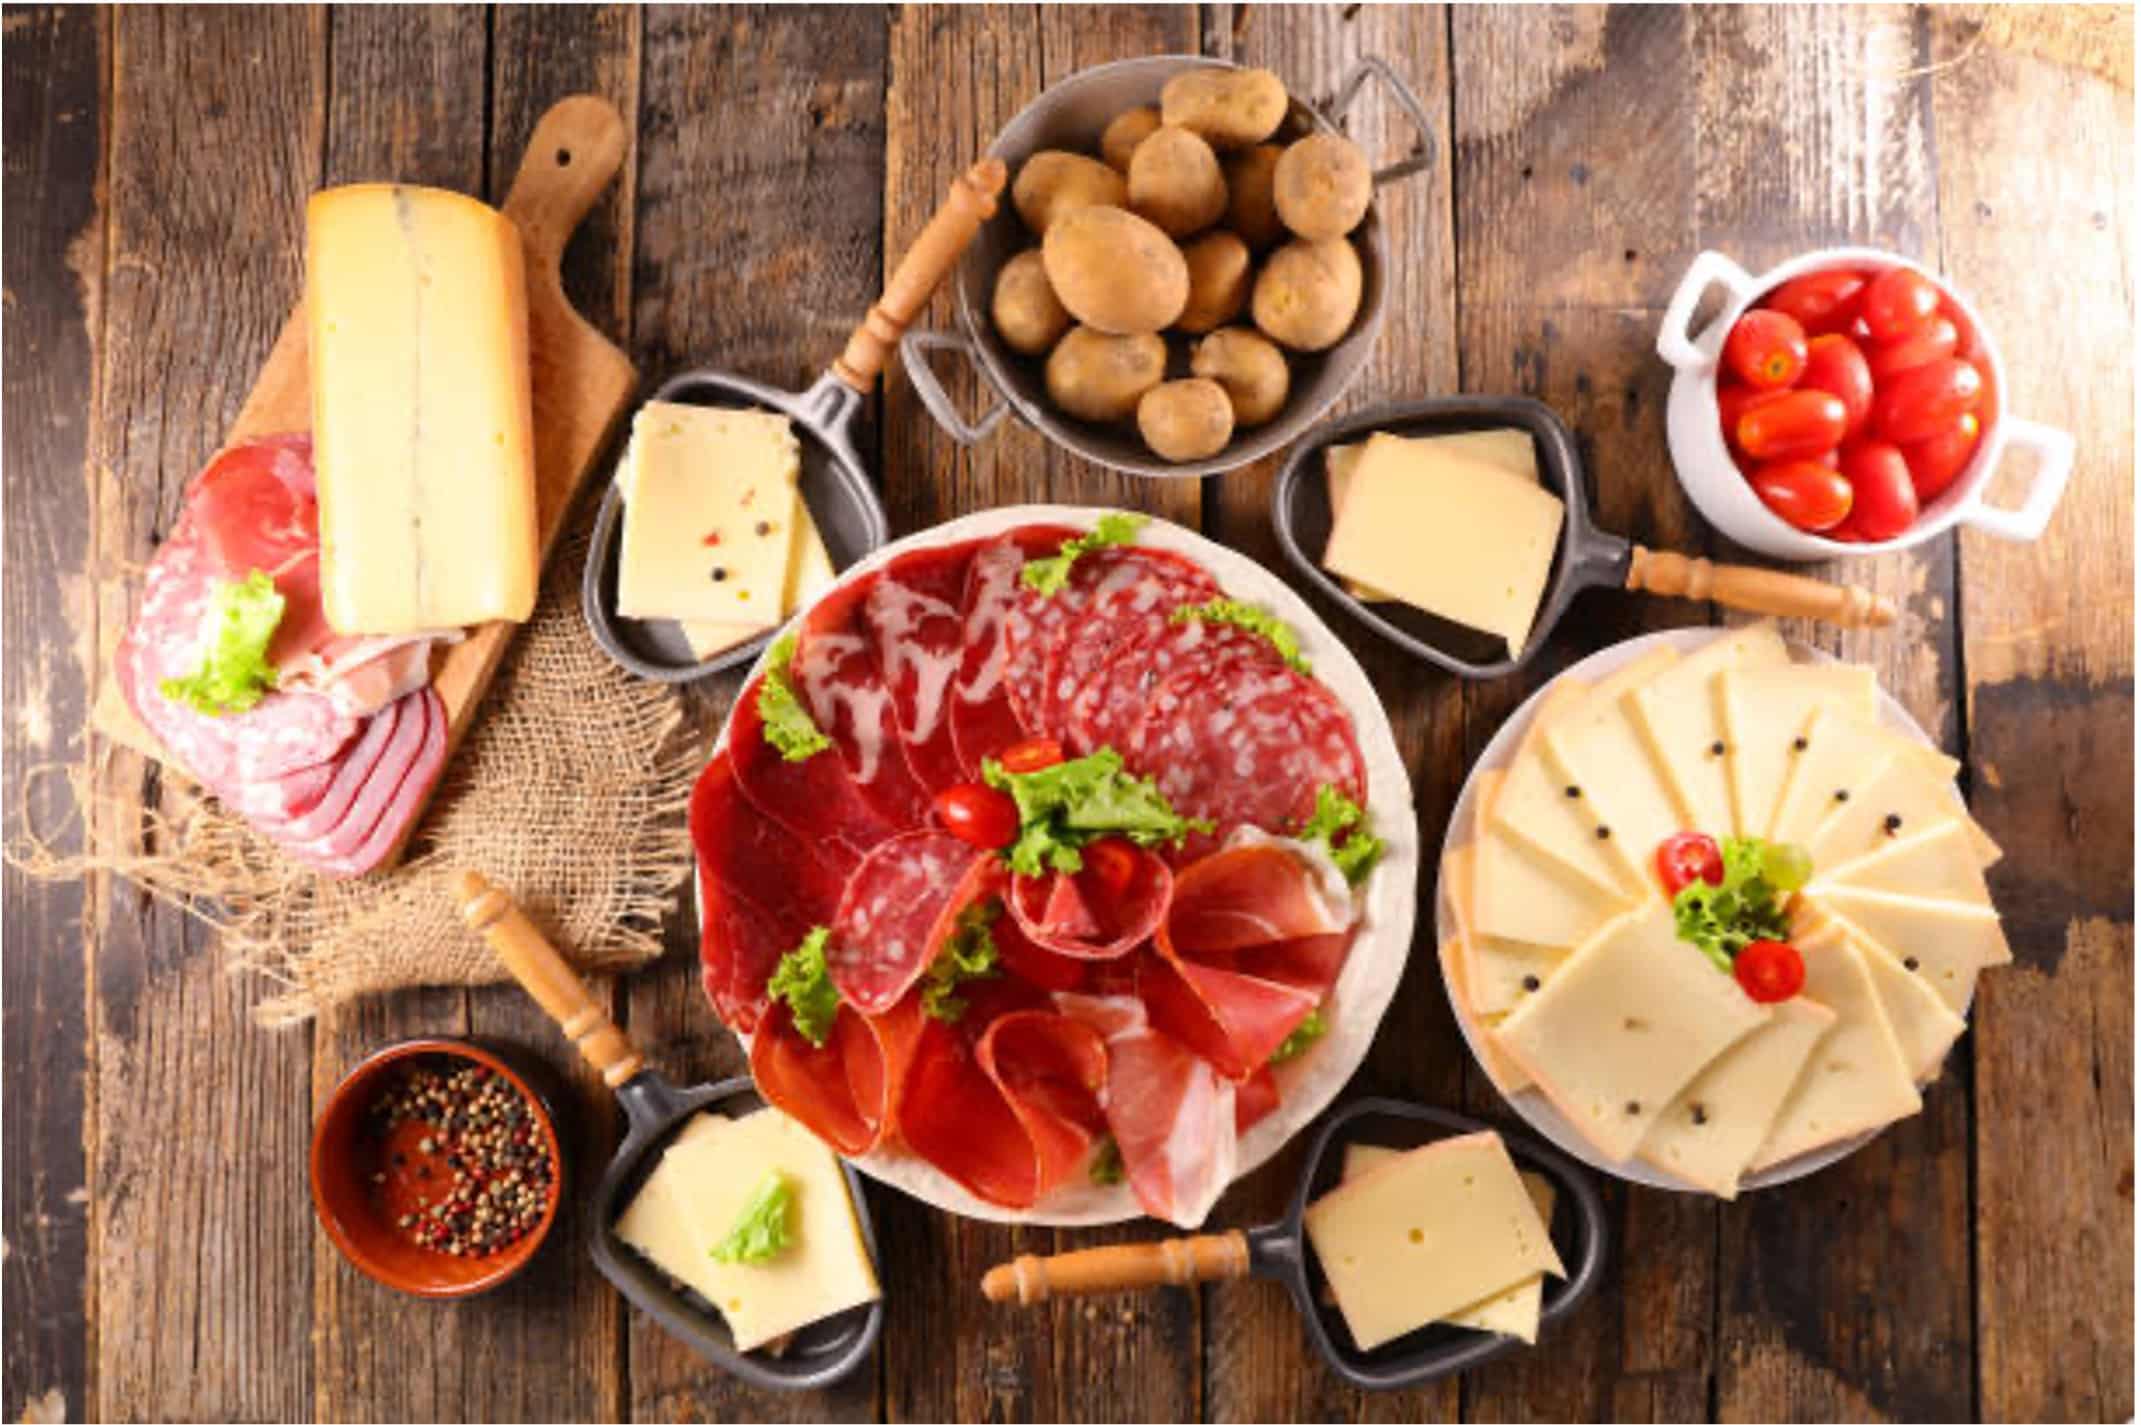 Charcuterie italienne, Charcuteries et fromages